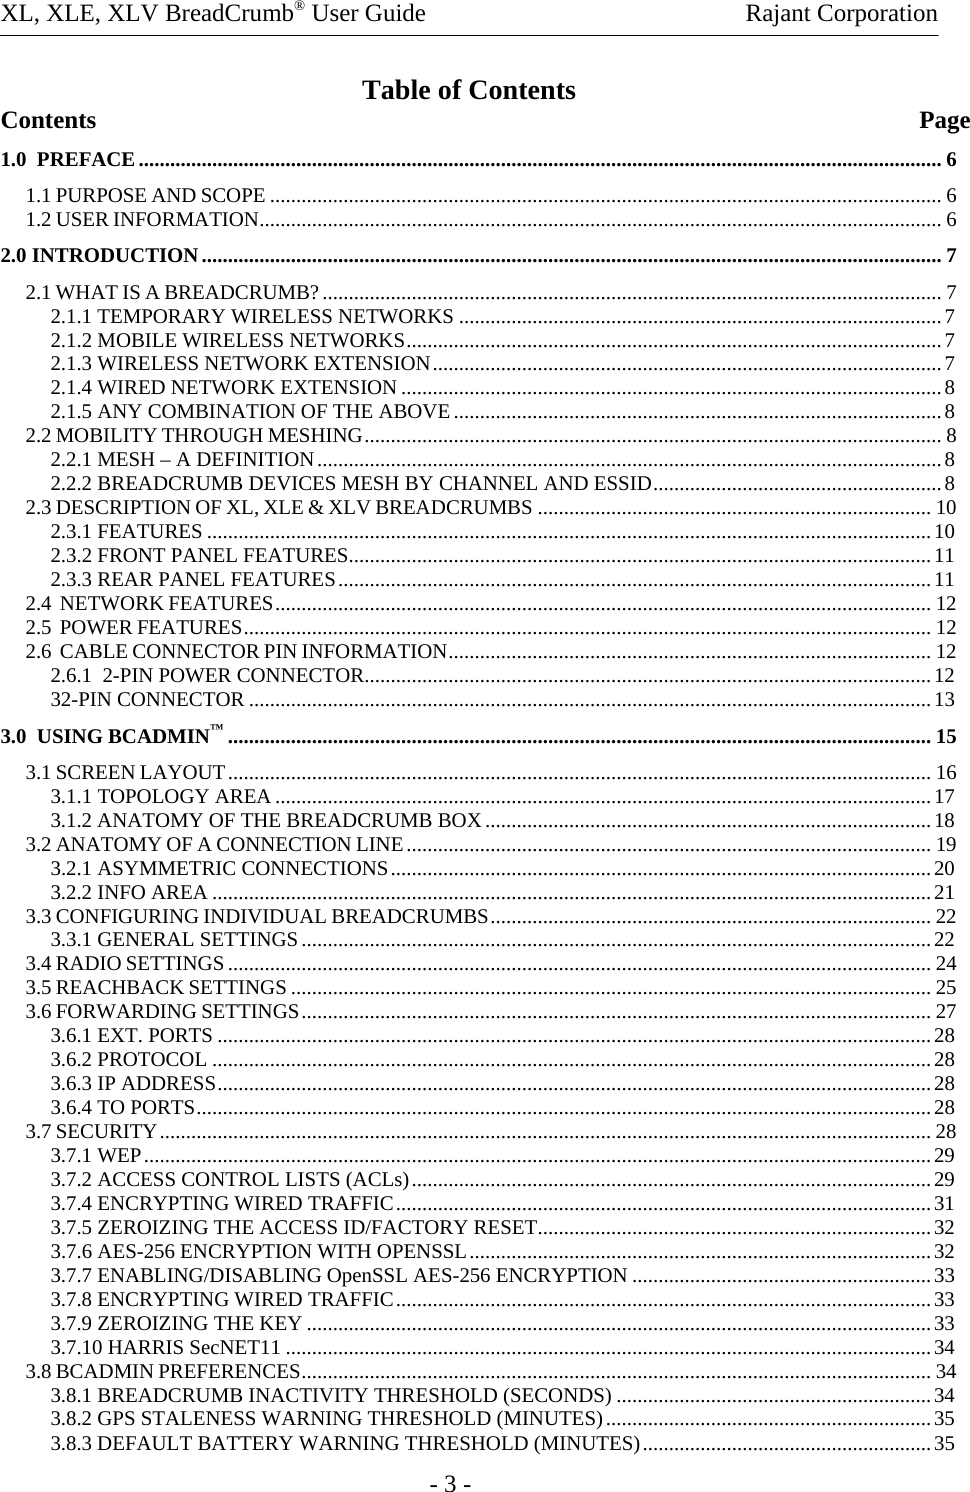 XL, XLE, XLV BreadCrumb® User Guide    Rajant Corporation     - 3 - Table of Contents Contents               Page 1.0  PREFACE......................................................................................................................................................... 6 1.1 PURPOSE AND SCOPE ................................................................................................................................6 1.2 USER INFORMATION.................................................................................................................................. 6 2.0 INTRODUCTION............................................................................................................................................. 7 2.1 WHAT IS A BREADCRUMB?...................................................................................................................... 7 2.1.1 TEMPORARY WIRELESS NETWORKS ............................................................................................7 2.1.2 MOBILE WIRELESS NETWORKS......................................................................................................7 2.1.3 WIRELESS NETWORK EXTENSION.................................................................................................7 2.1.4 WIRED NETWORK EXTENSION .......................................................................................................8 2.1.5 ANY COMBINATION OF THE ABOVE.............................................................................................8 2.2 MOBILITY THROUGH MESHING.............................................................................................................. 8 2.2.1 MESH – A DEFINITION.......................................................................................................................8 2.2.2 BREADCRUMB DEVICES MESH BY CHANNEL AND ESSID.......................................................8 2.3 DESCRIPTION OF XL, XLE &amp; XLV BREADCRUMBS ........................................................................... 10 2.3.1 FEATURES ..........................................................................................................................................10 2.3.2 FRONT PANEL FEATURES...............................................................................................................11 2.3.3 REAR PANEL FEATURES.................................................................................................................11 2.4  NETWORK FEATURES............................................................................................................................. 12 2.5  POWER FEATURES................................................................................................................................... 12 2.6  CABLE CONNECTOR PIN INFORMATION............................................................................................ 12 2.6.1  2-PIN POWER CONNECTOR............................................................................................................12 32-PIN CONNECTOR ..................................................................................................................................13 3.0  USING BCADMIN™...................................................................................................................................... 15 3.1 SCREEN LAYOUT...................................................................................................................................... 16 3.1.1 TOPOLOGY AREA.............................................................................................................................17 3.1.2 ANATOMY OF THE BREADCRUMB BOX.....................................................................................18 3.2 ANATOMY OF A CONNECTION LINE.................................................................................................... 19 3.2.1 ASYMMETRIC CONNECTIONS.......................................................................................................20 3.2.2 INFO AREA .........................................................................................................................................21 3.3 CONFIGURING INDIVIDUAL BREADCRUMBS.................................................................................... 22 3.3.1 GENERAL SETTINGS........................................................................................................................22 3.4 RADIO SETTINGS...................................................................................................................................... 24 3.5 REACHBACK SETTINGS .......................................................................................................................... 25 3.6 FORWARDING SETTINGS........................................................................................................................ 27 3.6.1 EXT. PORTS ........................................................................................................................................28 3.6.2 PROTOCOL .........................................................................................................................................28 3.6.3 IP ADDRESS........................................................................................................................................28 3.6.4 TO PORTS............................................................................................................................................28 3.7 SECURITY................................................................................................................................................... 28 3.7.1 WEP......................................................................................................................................................29 3.7.2 ACCESS CONTROL LISTS (ACLs)...................................................................................................29 3.7.4 ENCRYPTING WIRED TRAFFIC......................................................................................................31 3.7.5 ZEROIZING THE ACCESS ID/FACTORY RESET...........................................................................32 3.7.6 AES-256 ENCRYPTION WITH OPENSSL........................................................................................32 3.7.7 ENABLING/DISABLING OpenSSL AES-256 ENCRYPTION .........................................................33 3.7.8 ENCRYPTING WIRED TRAFFIC......................................................................................................33 3.7.9 ZEROIZING THE KEY .......................................................................................................................33 3.7.10 HARRIS SecNET11 ...........................................................................................................................34 3.8 BCADMIN PREFERENCES........................................................................................................................ 34 3.8.1 BREADCRUMB INACTIVITY THRESHOLD (SECONDS) ............................................................34 3.8.2 GPS STALENESS WARNING THRESHOLD (MINUTES)..............................................................35 3.8.3 DEFAULT BATTERY WARNING THRESHOLD (MINUTES).......................................................35 